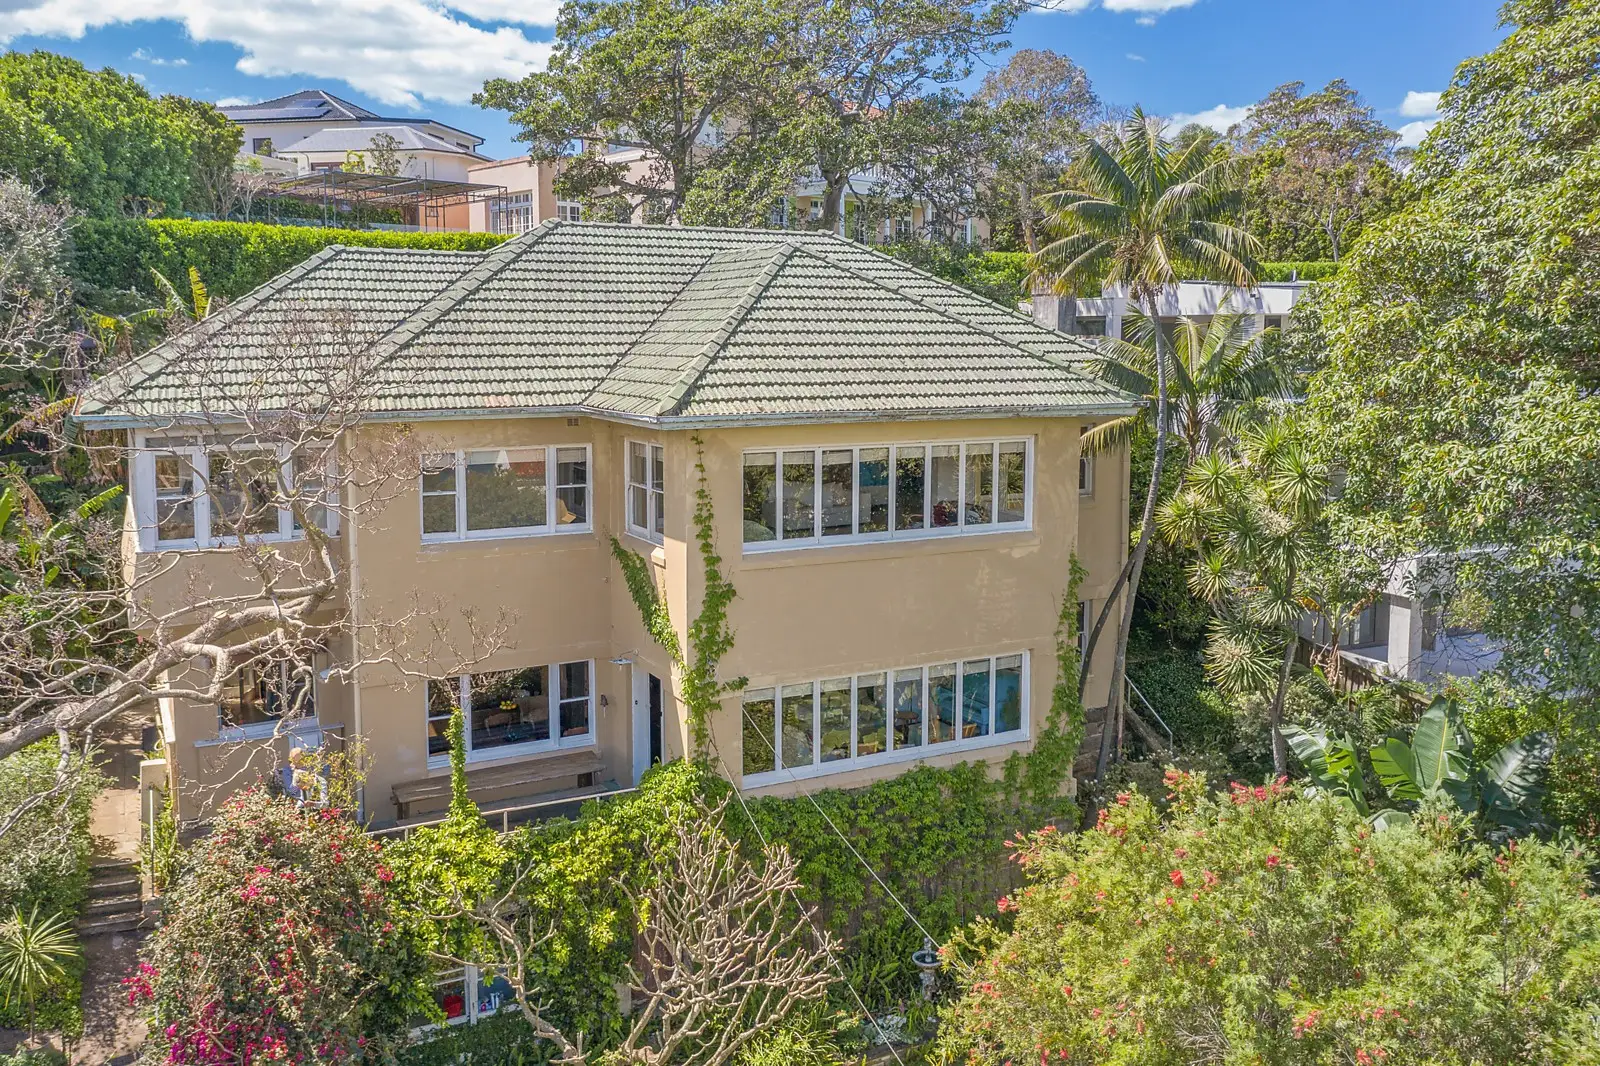 Photo #2: 41 Vaucluse Road, Vaucluse - Sold by Sydney Sotheby's International Realty